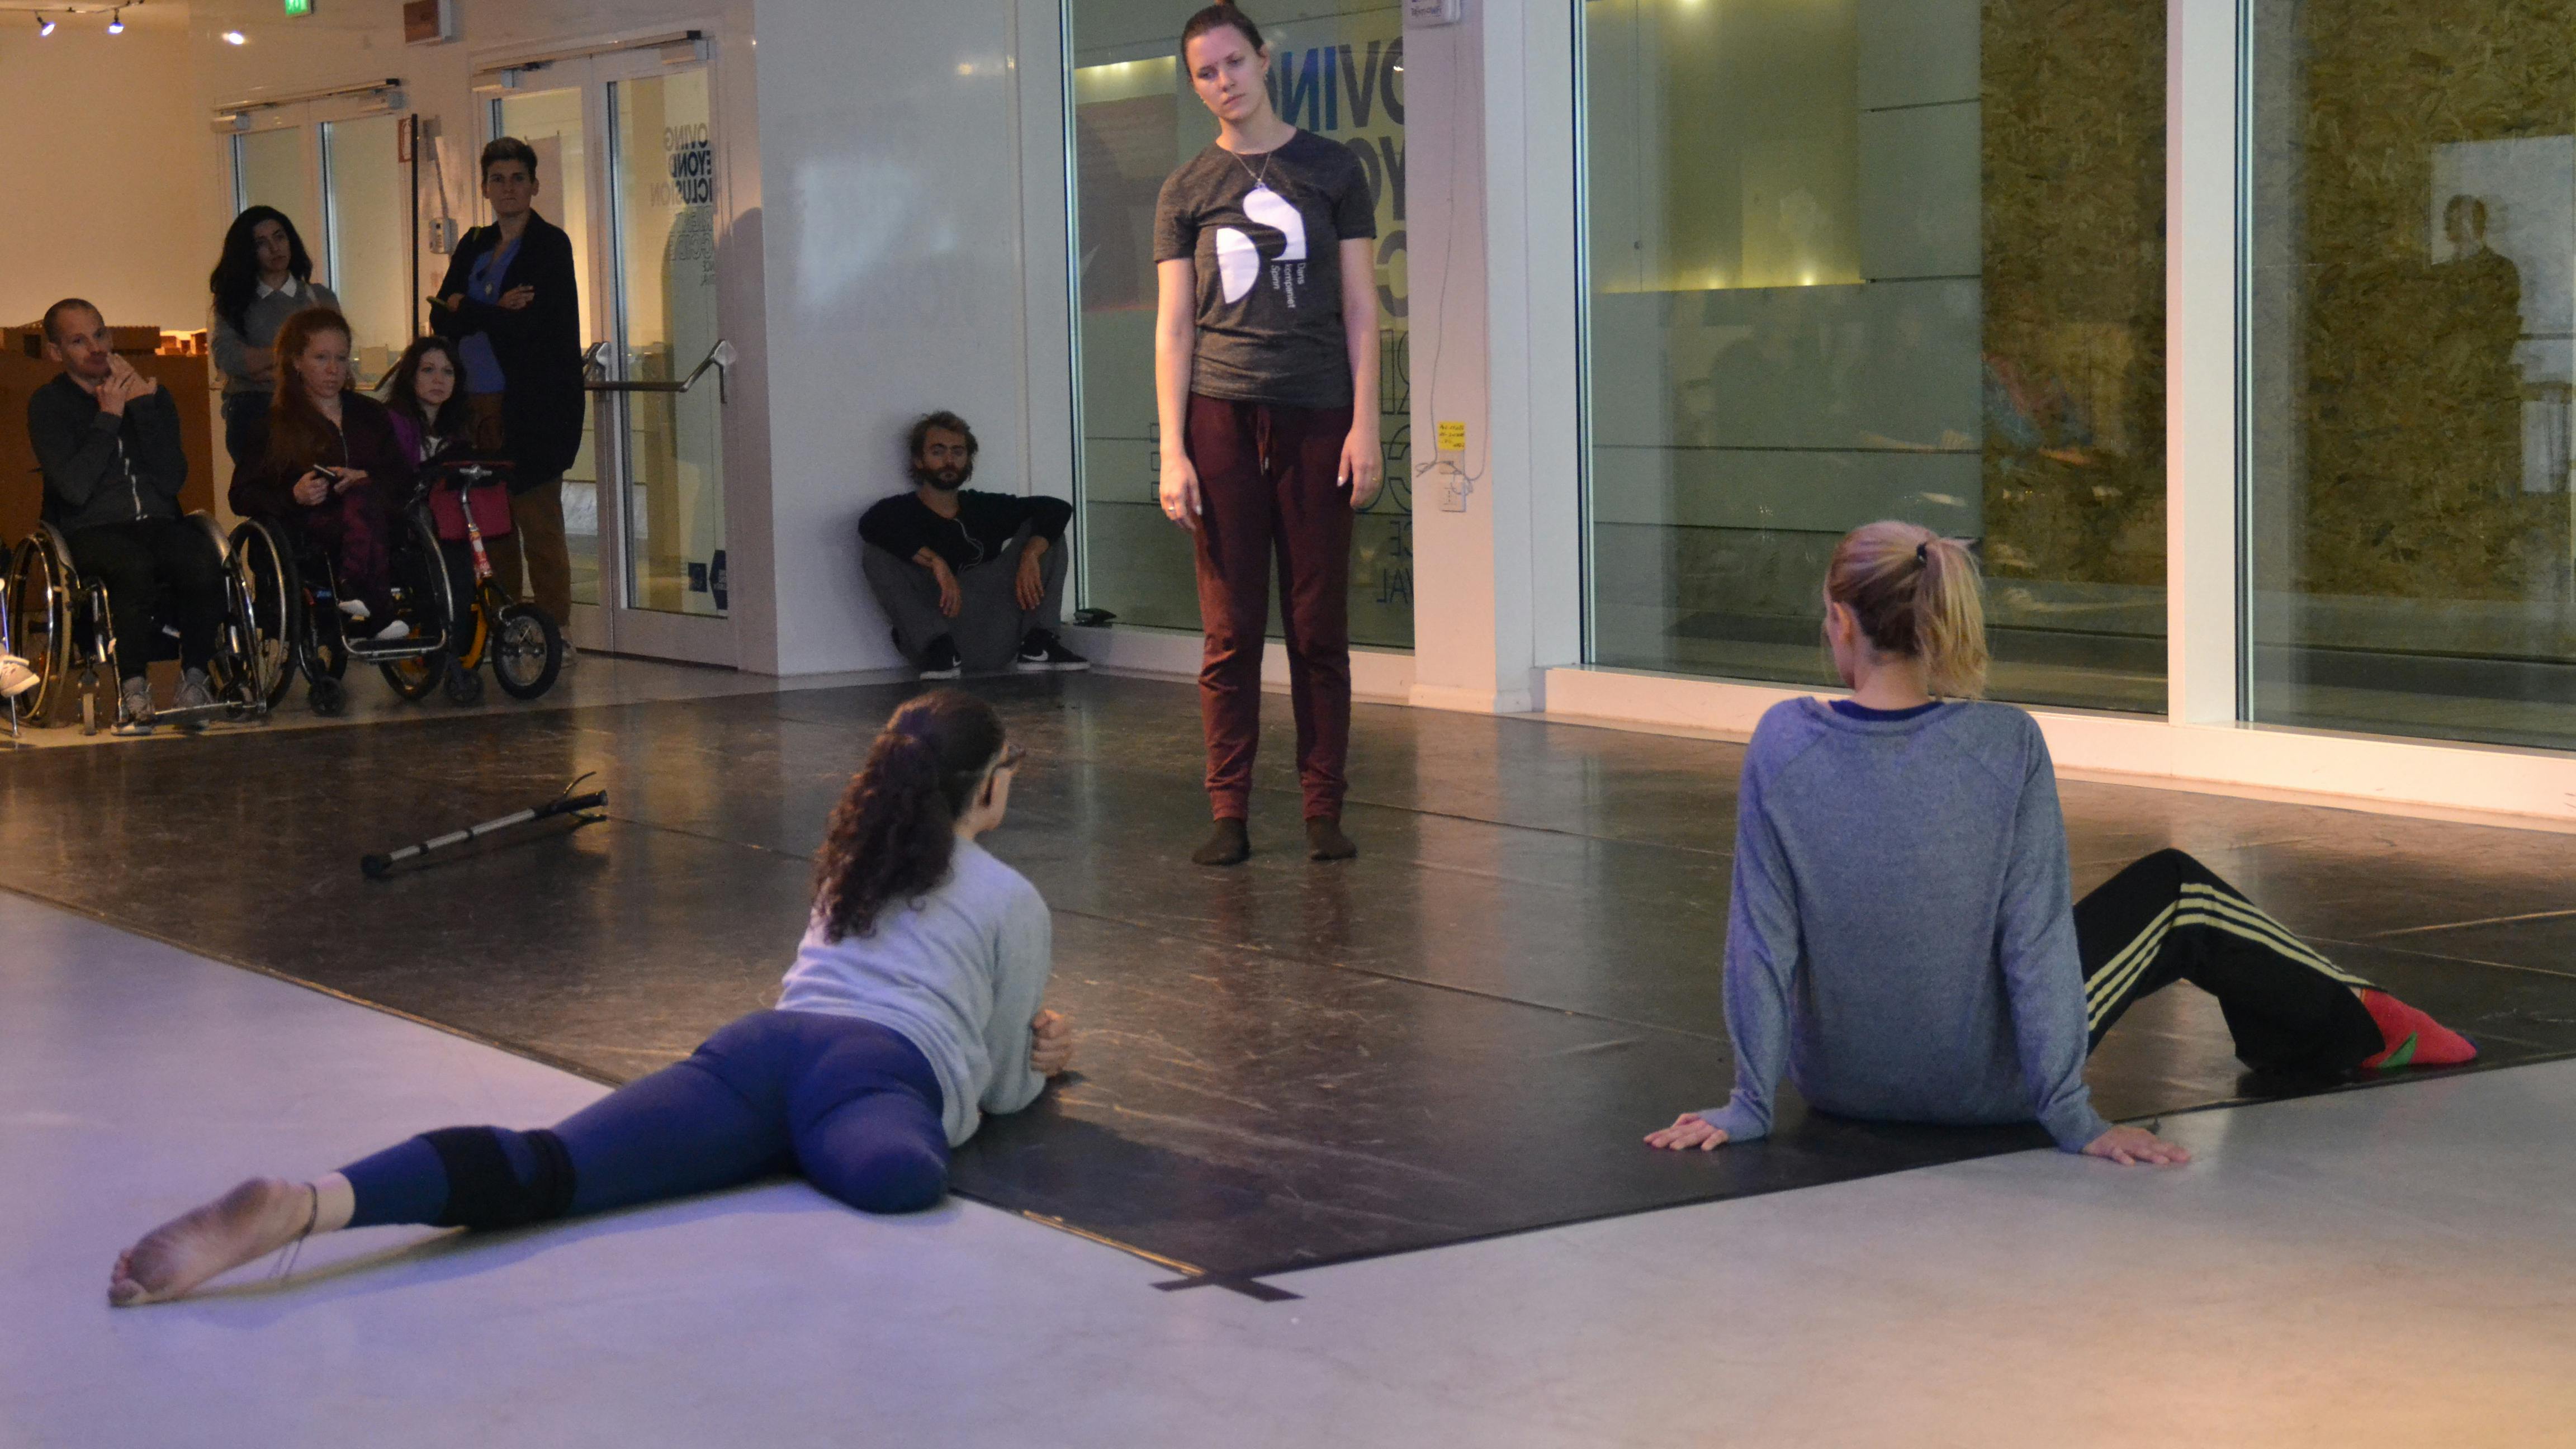 Three dancers, one of them without a leg, during a workshop. Other participants with and without disabilities observe from the back of the room.